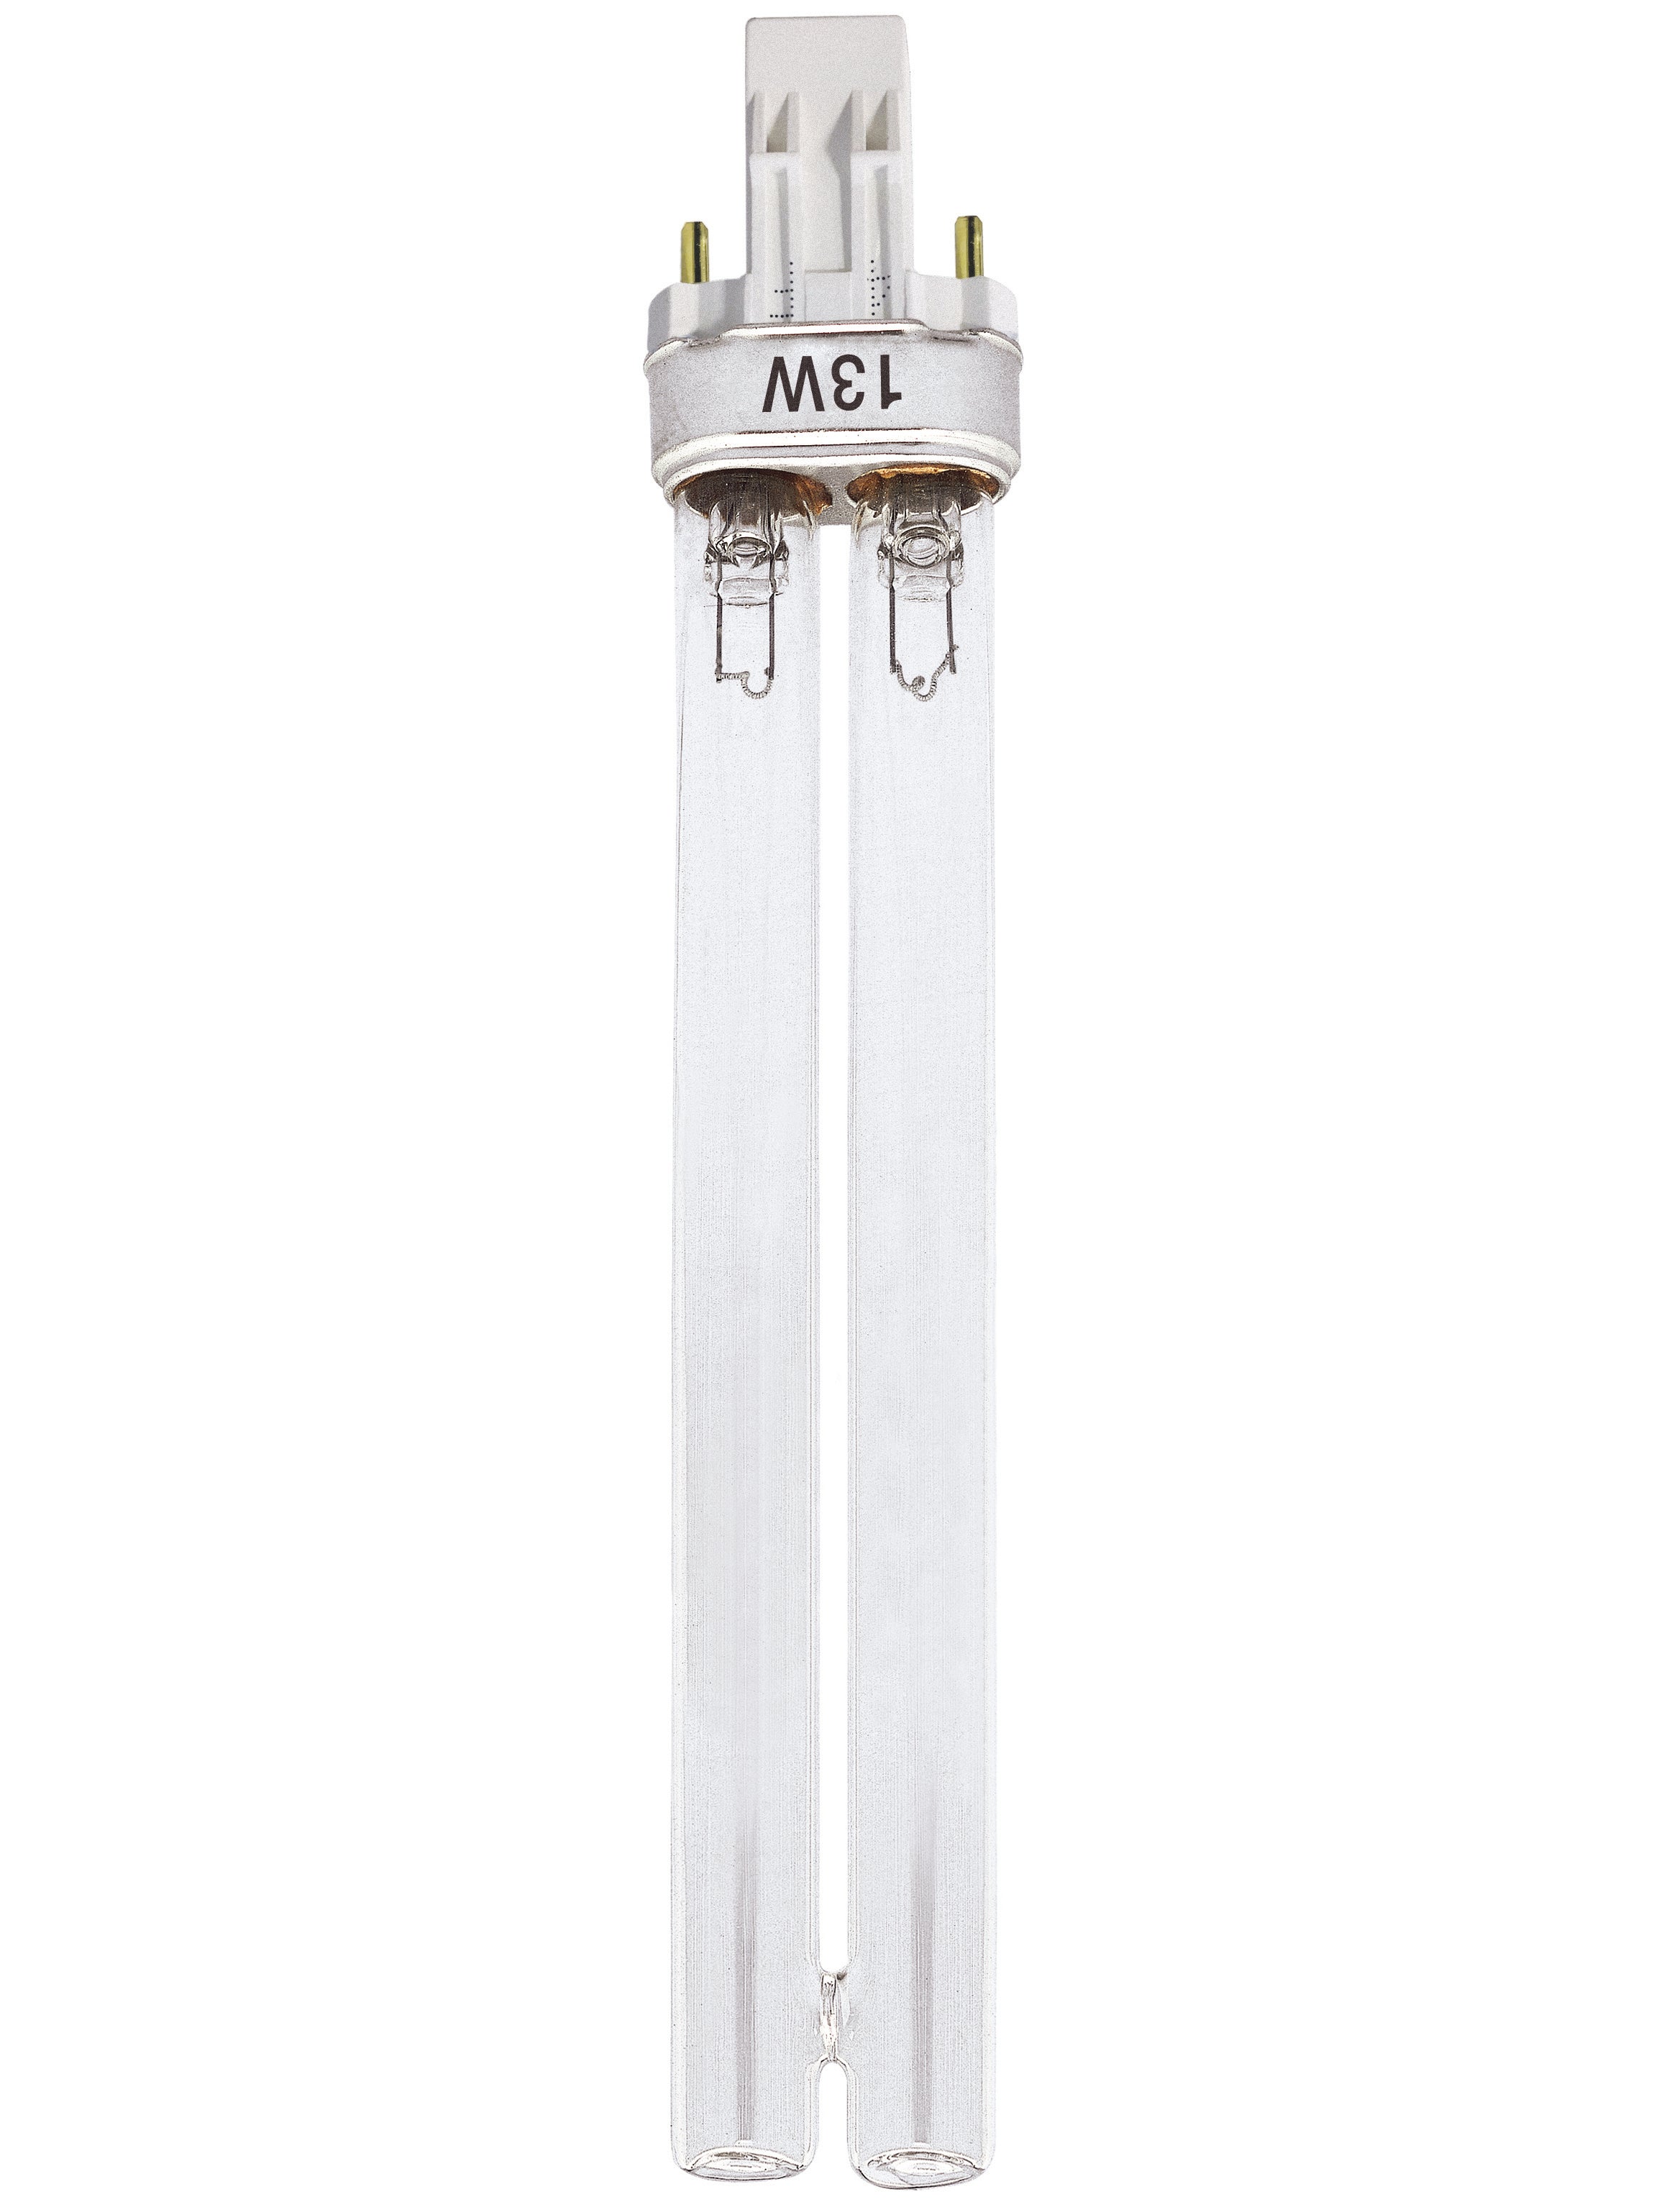 OASE UVC Replacement bulb 13 W